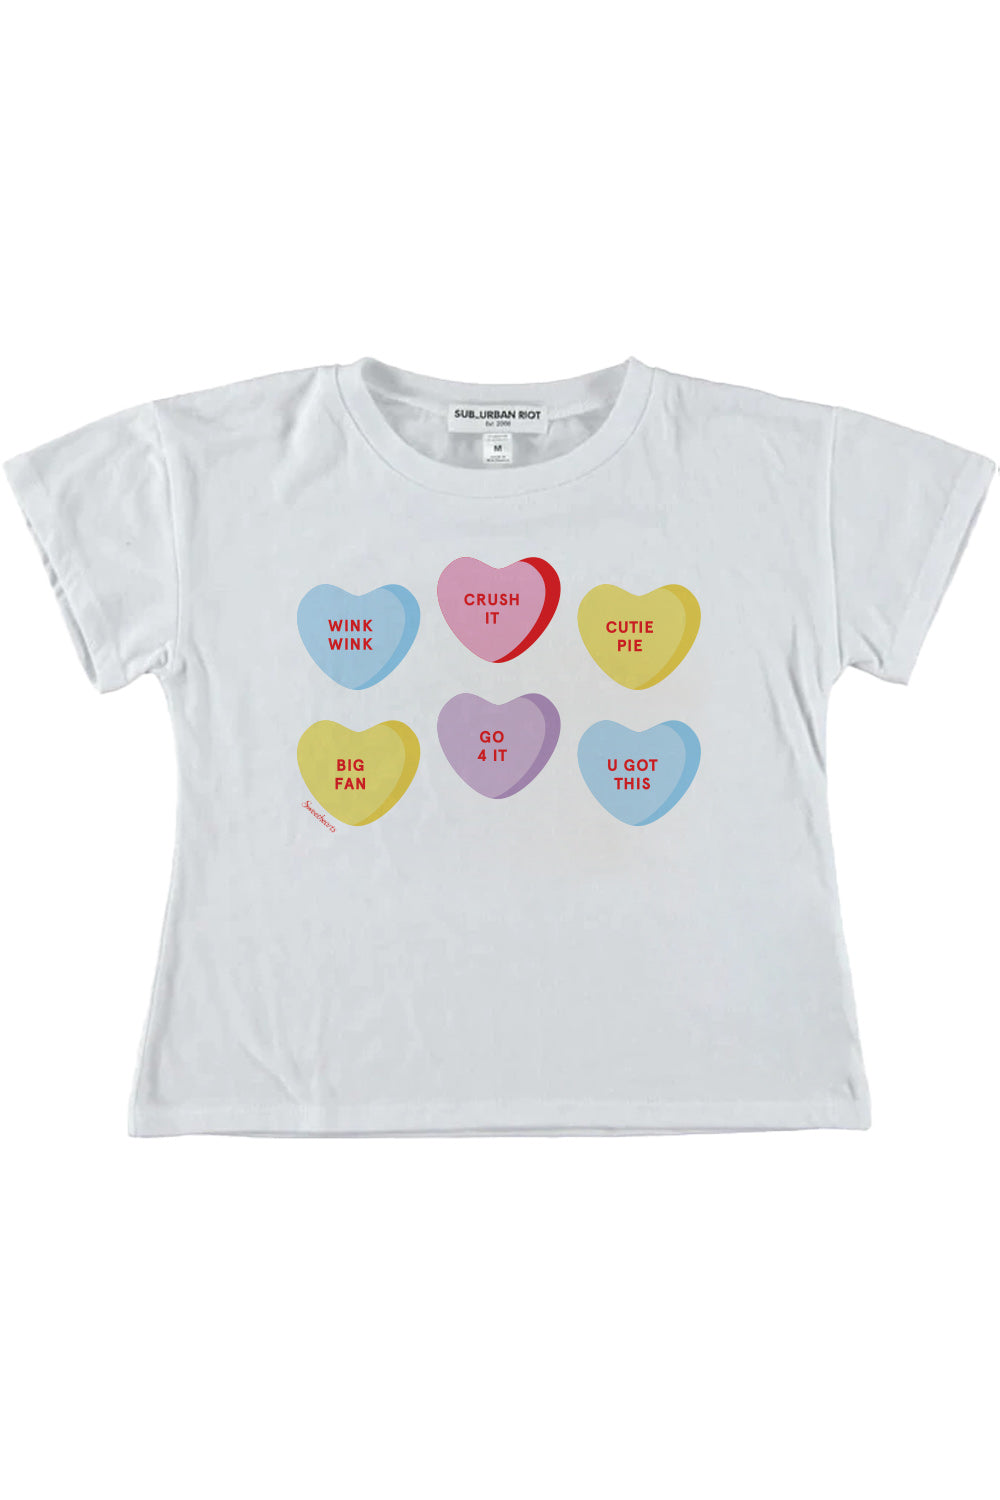 CANDY HEARTS YOUTH SIZE CROP TEE